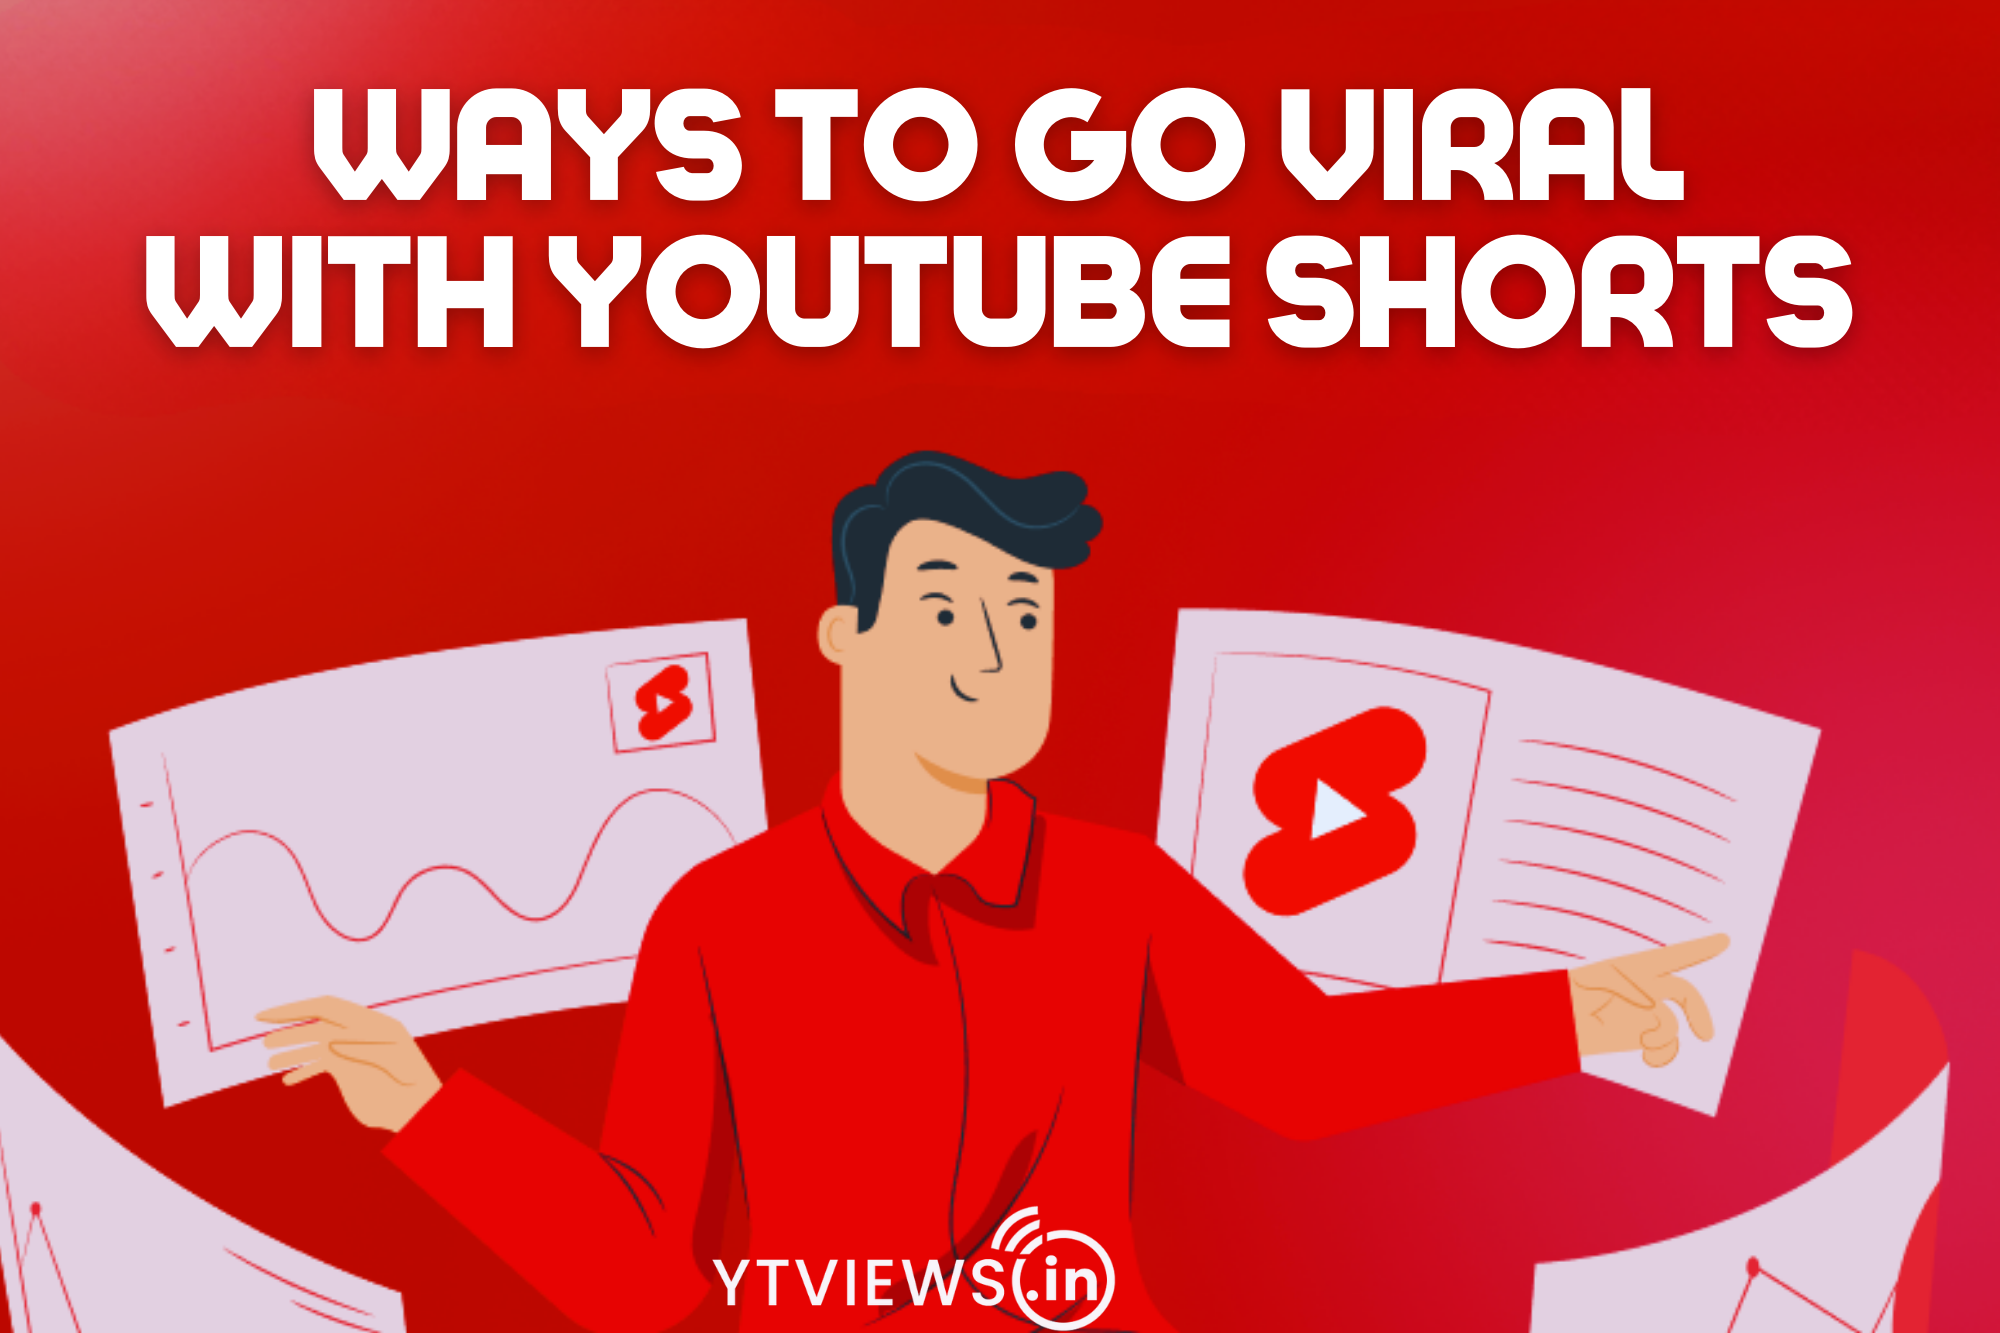 Ways to go viral with YouTube shorts